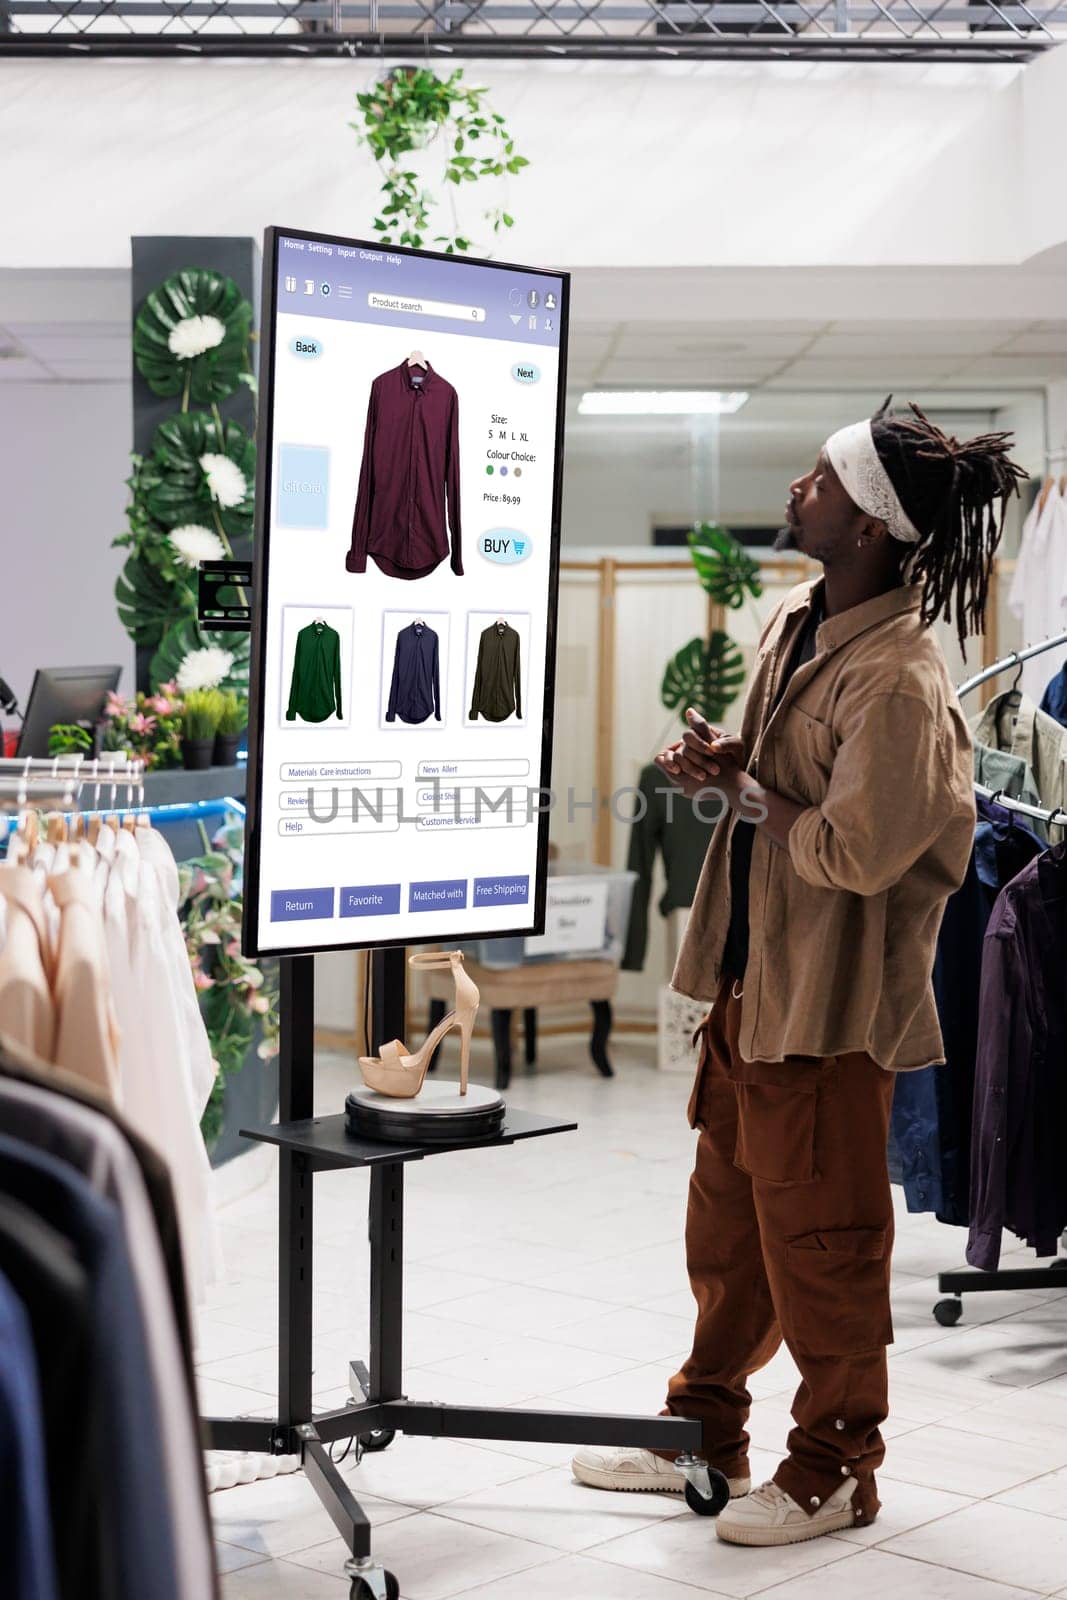 Male client choosing clothes on shopping board kiosk service, buying fashion collection items in clothing store using interactive monitor. Trendy buyer shopping for products, self ordering.